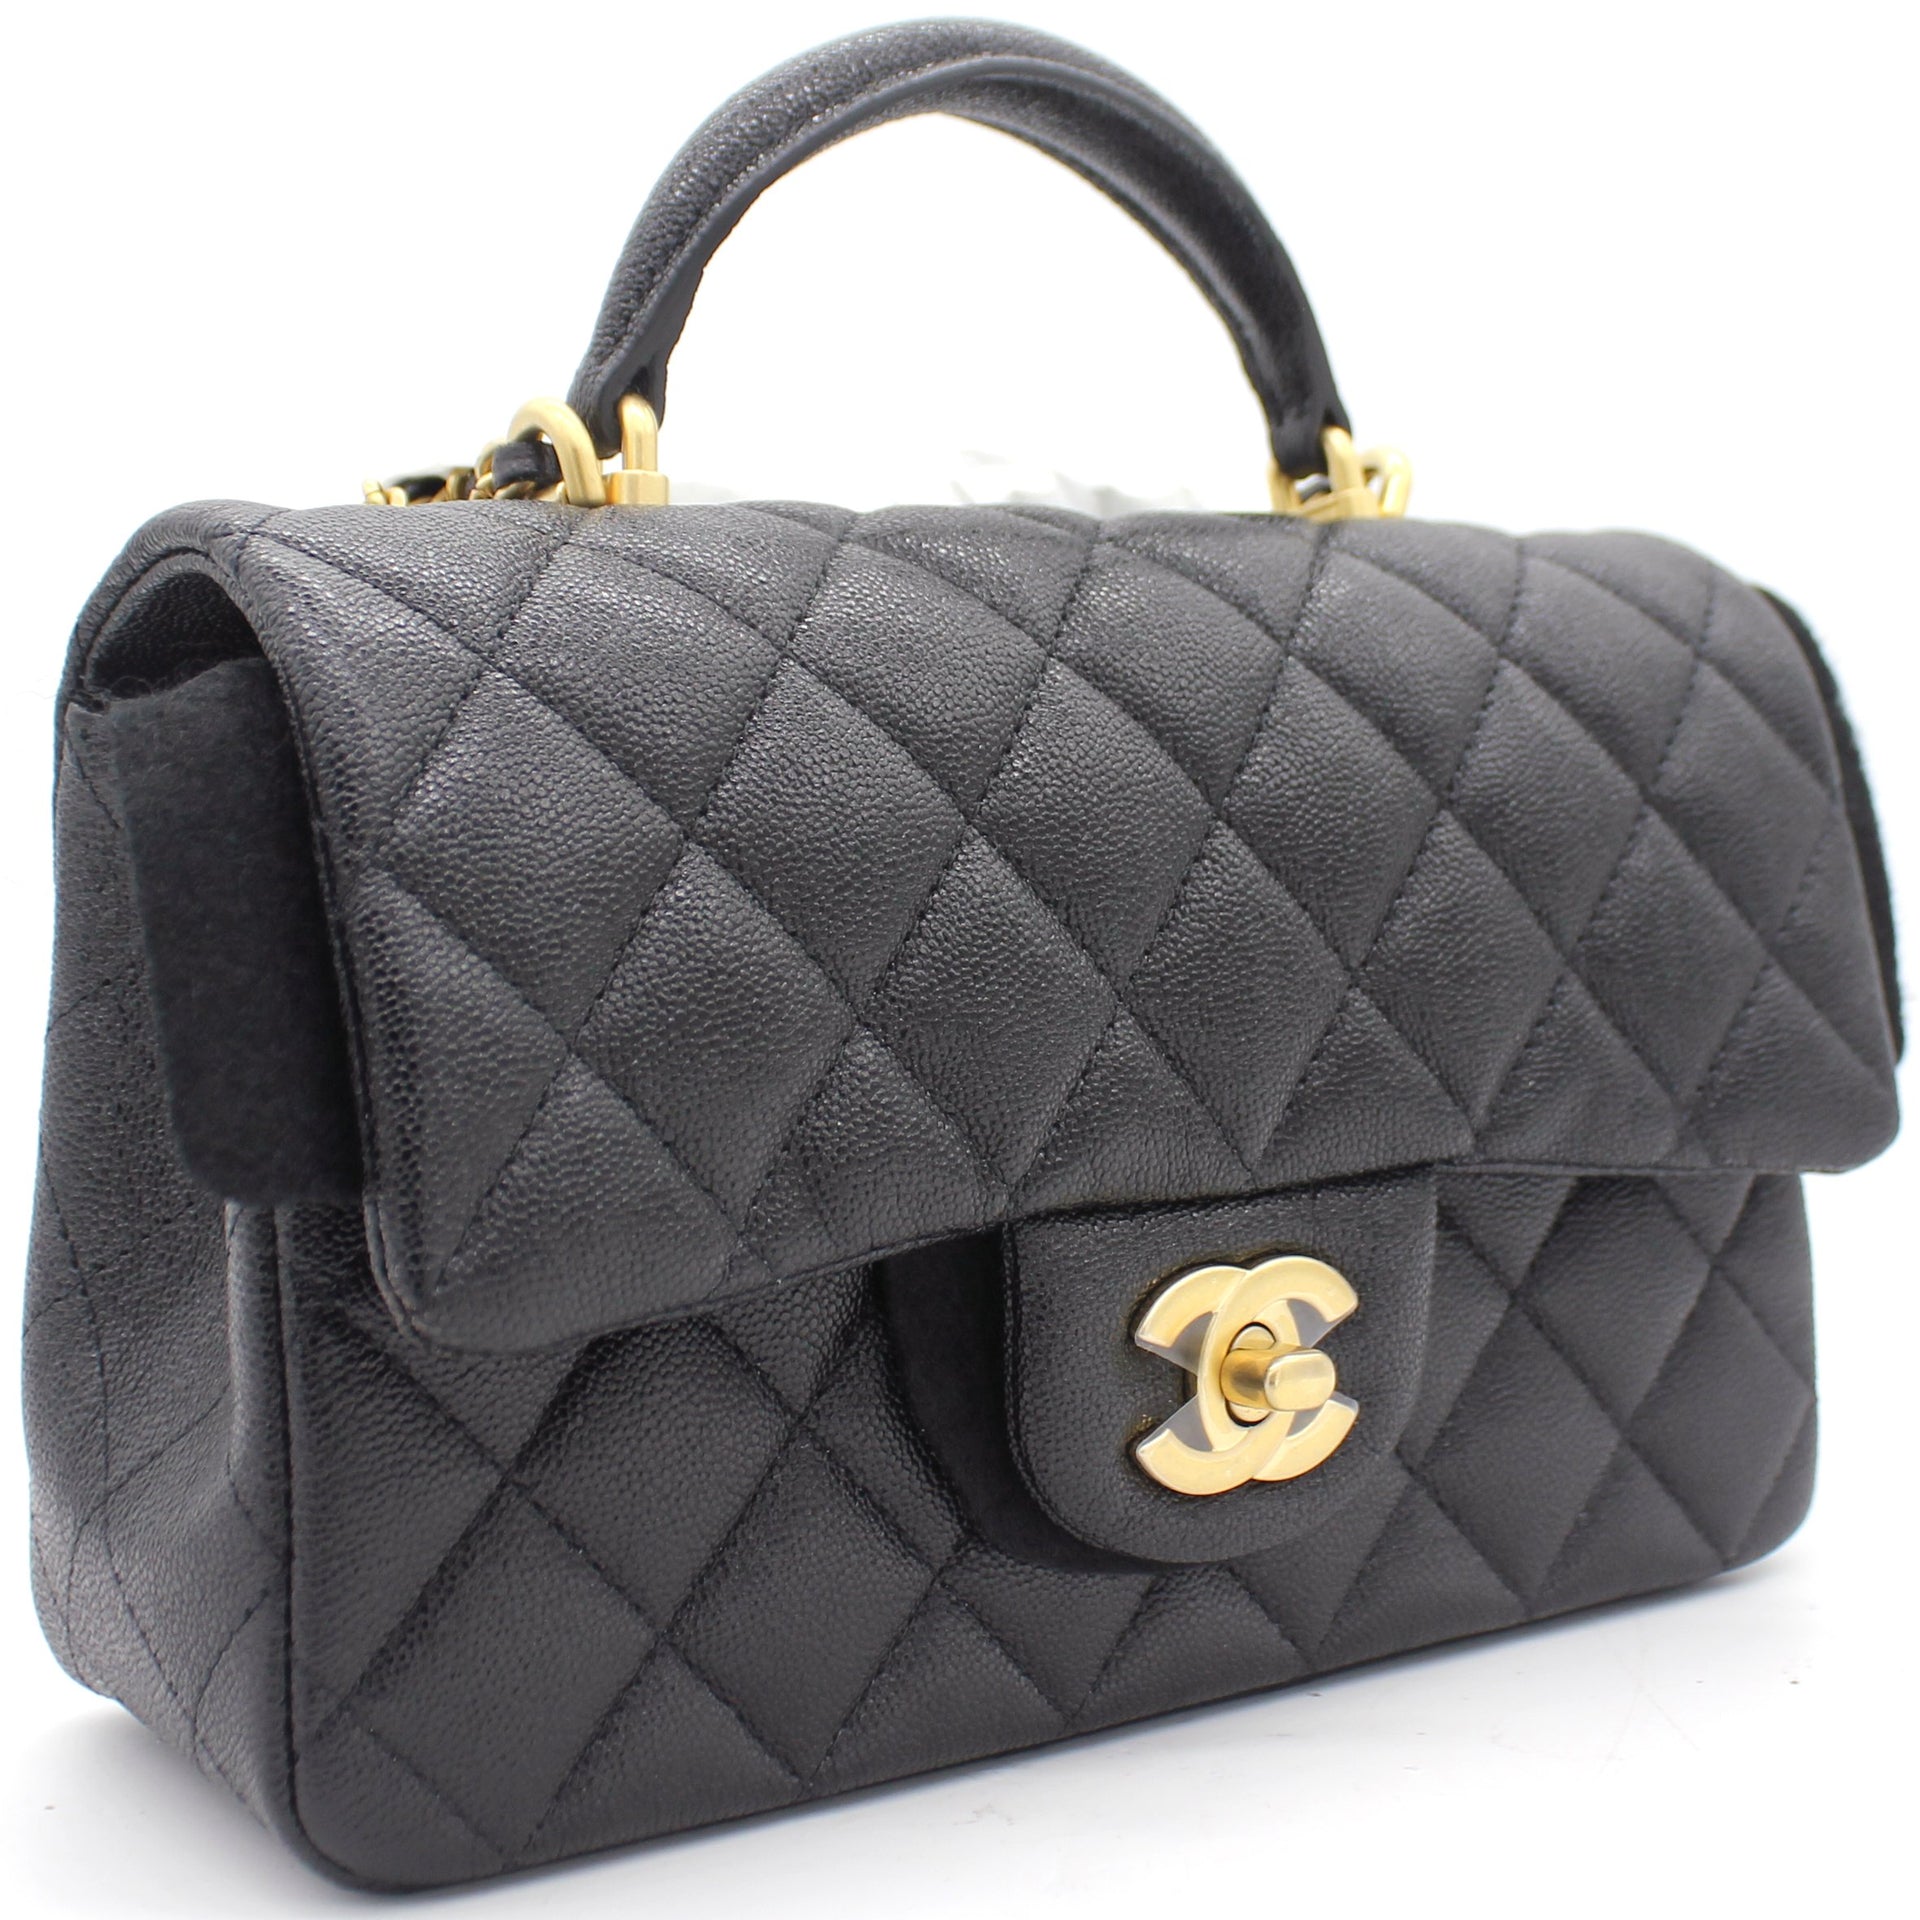 chanel flap bag with top handle price